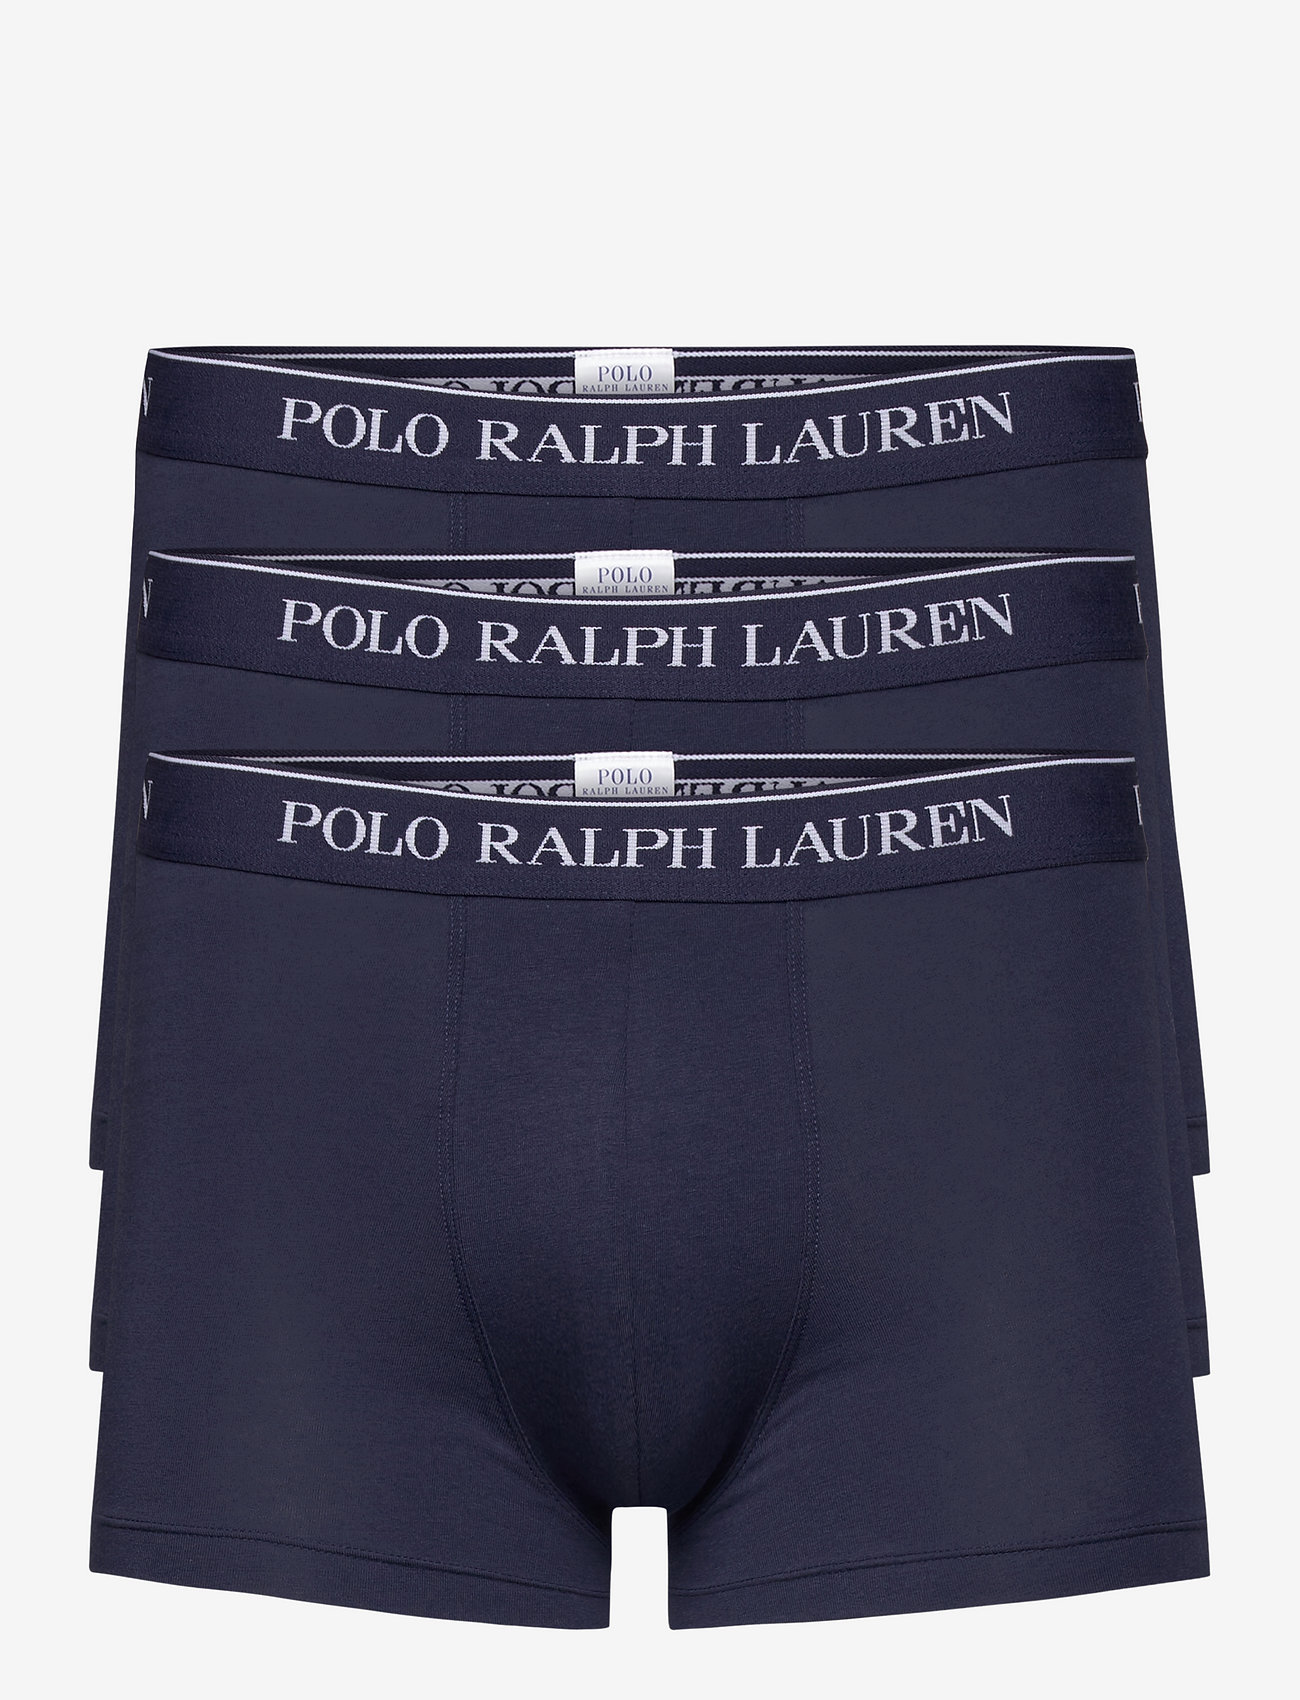 Polo Ralph Lauren Underwear - Stretch Cotton Trunk 3-Pack - multipack underbukser - 3pk cr nvy/cr nvy/ cr nvy - 0